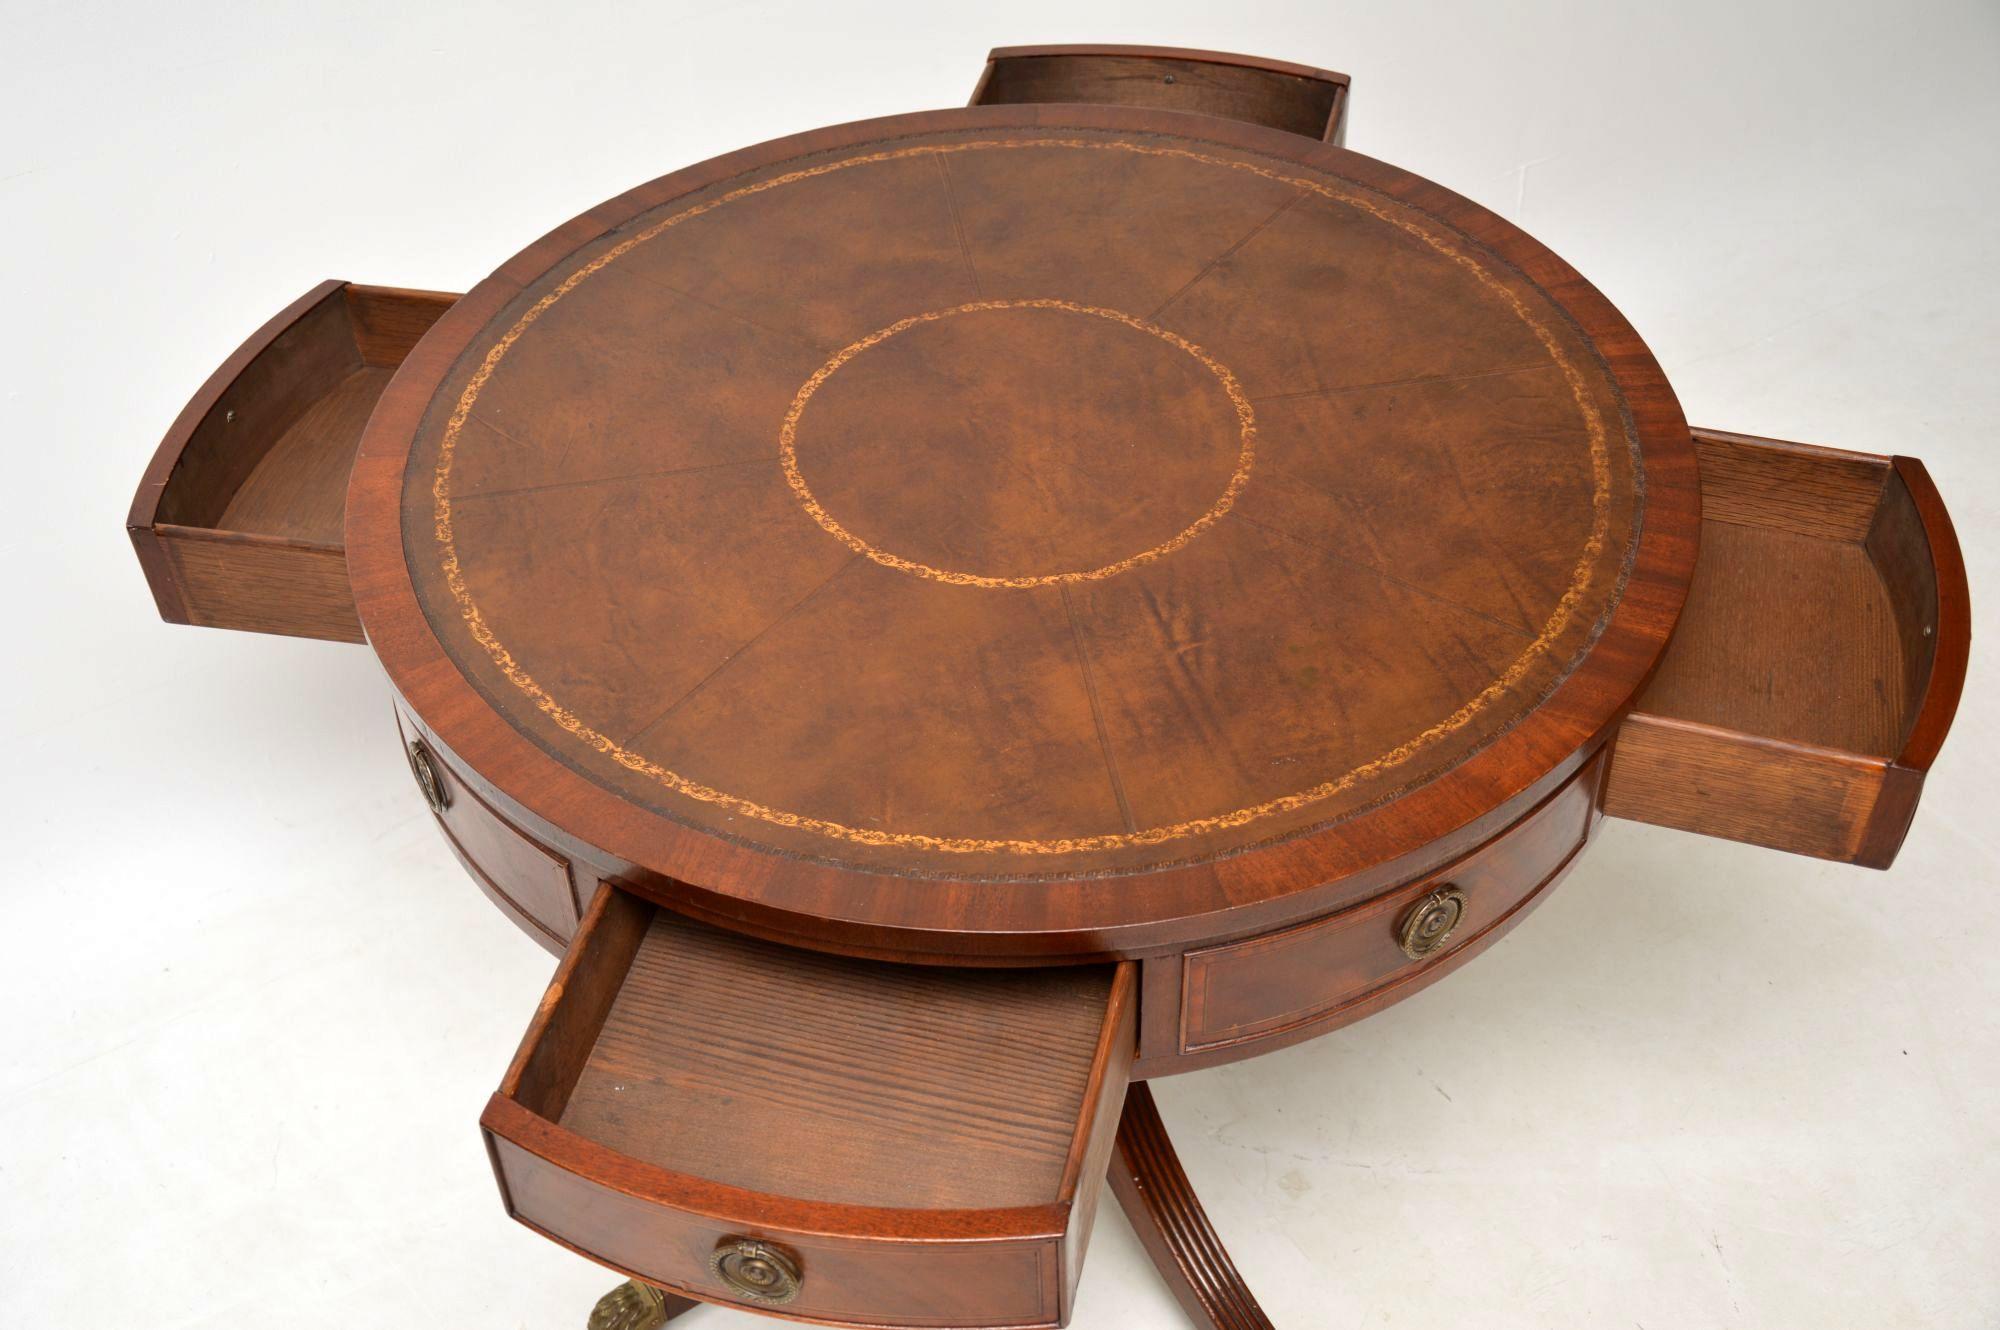 Regency Antique Mahogany Leather Top Drum Table